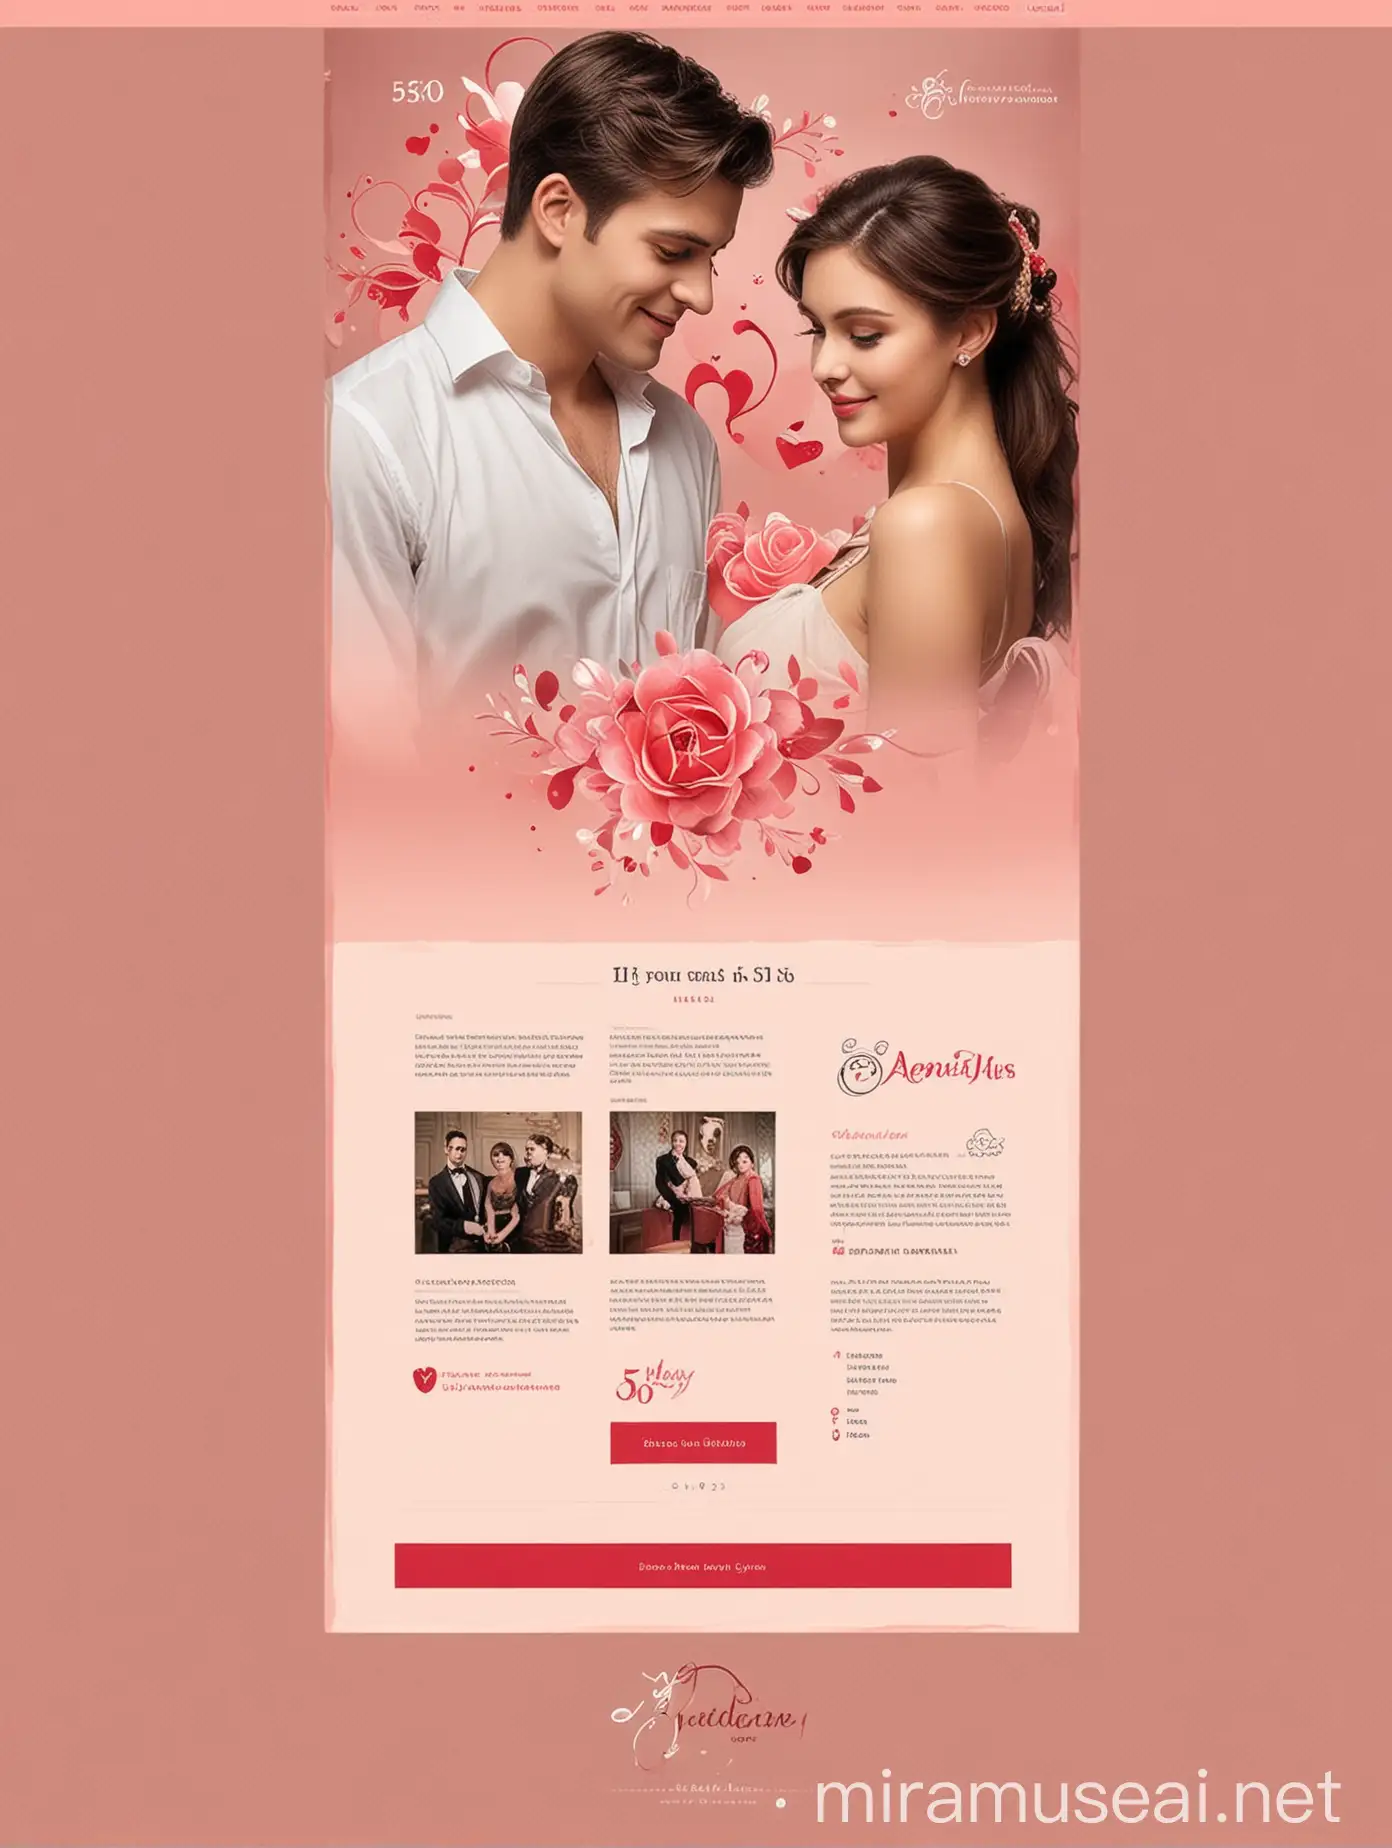 Elegant 520 Lovers Day Page Layout Design Theme Romance and Luxury in Abundance